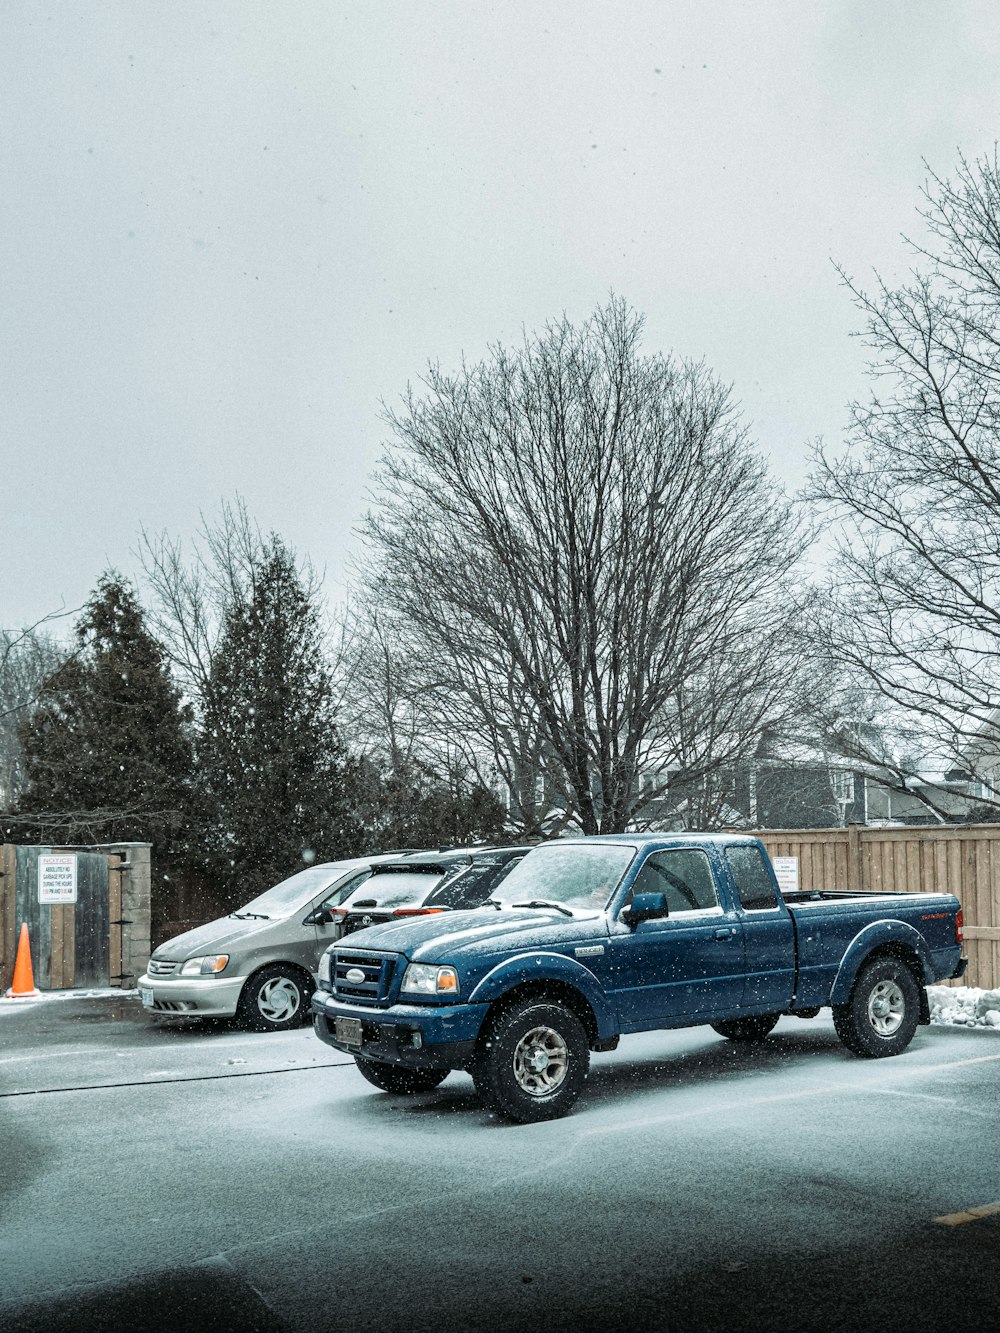 a blue pick up truck parked in a parking lot